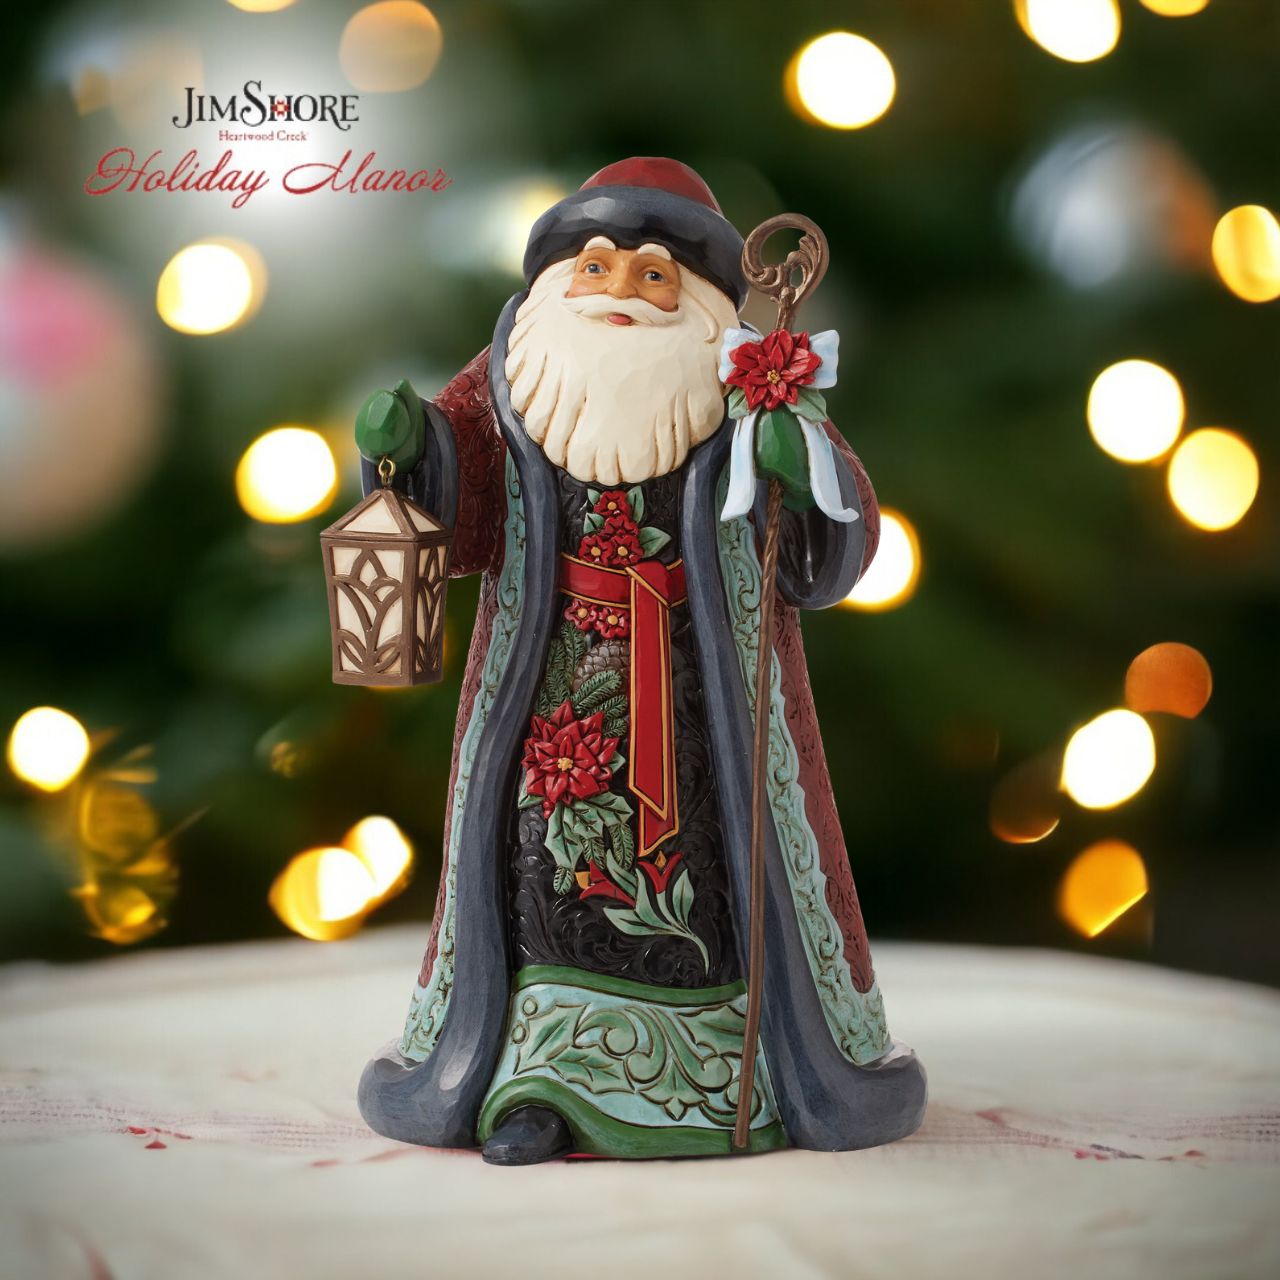 Heartwood Creek Holiday Manor Santa with Cane Figurine  Designed by award winning artist Jim Shore as part of the Heartwood Creek Holiday Manor Collection, hand crafted using high quality cast stone and hand painted, this Santa with his cane is perfect for the Christmas season. Packaging, Full colour, fully branded gift box with photo.